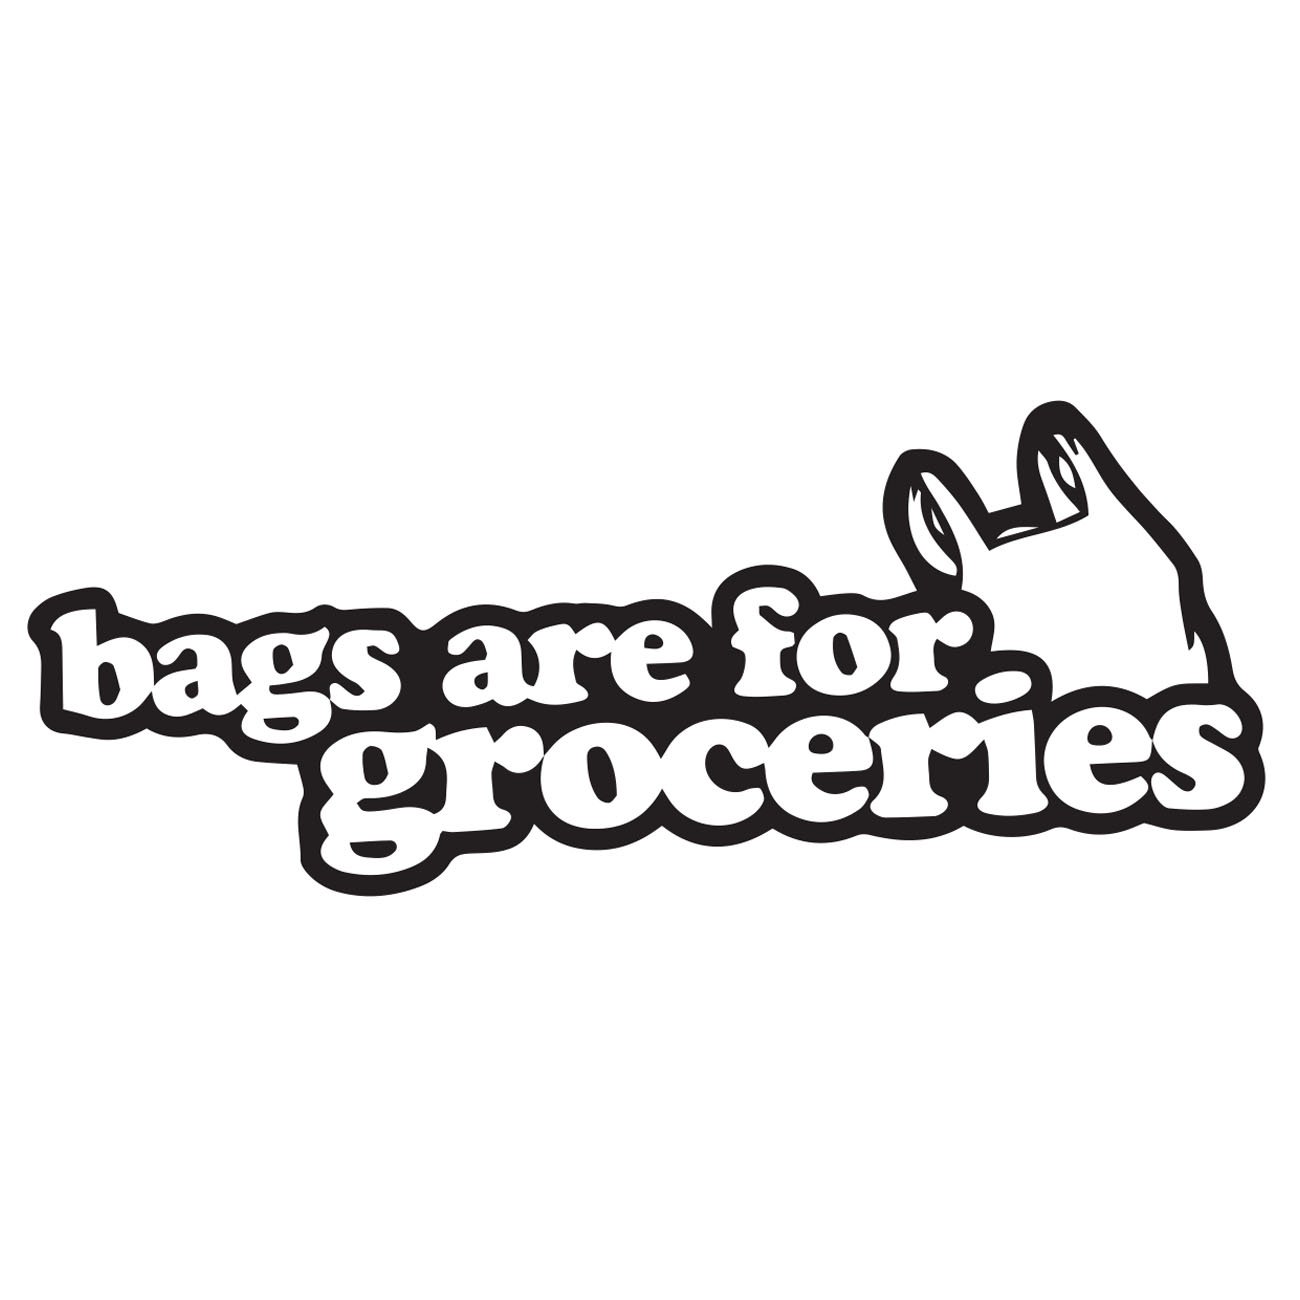 Bags are for groceries